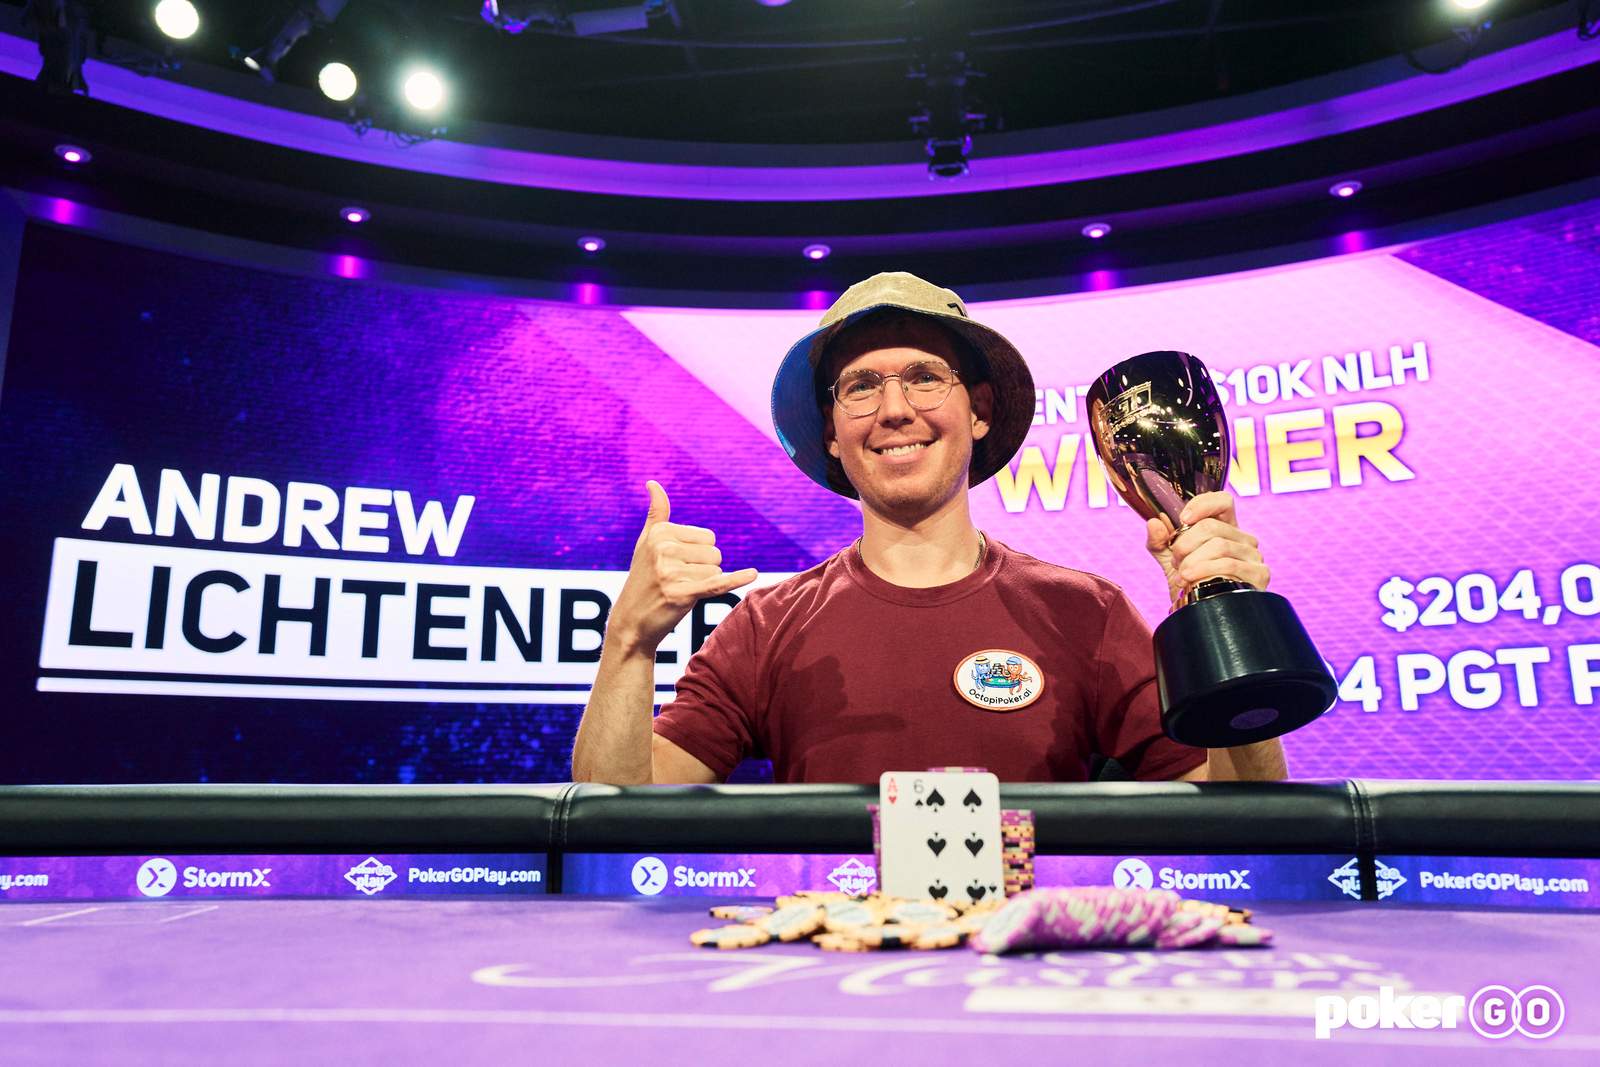 Andrew Lichtenberger Wins 2023 Poker Masters Event #5 on his 36th Birthday for $204,000